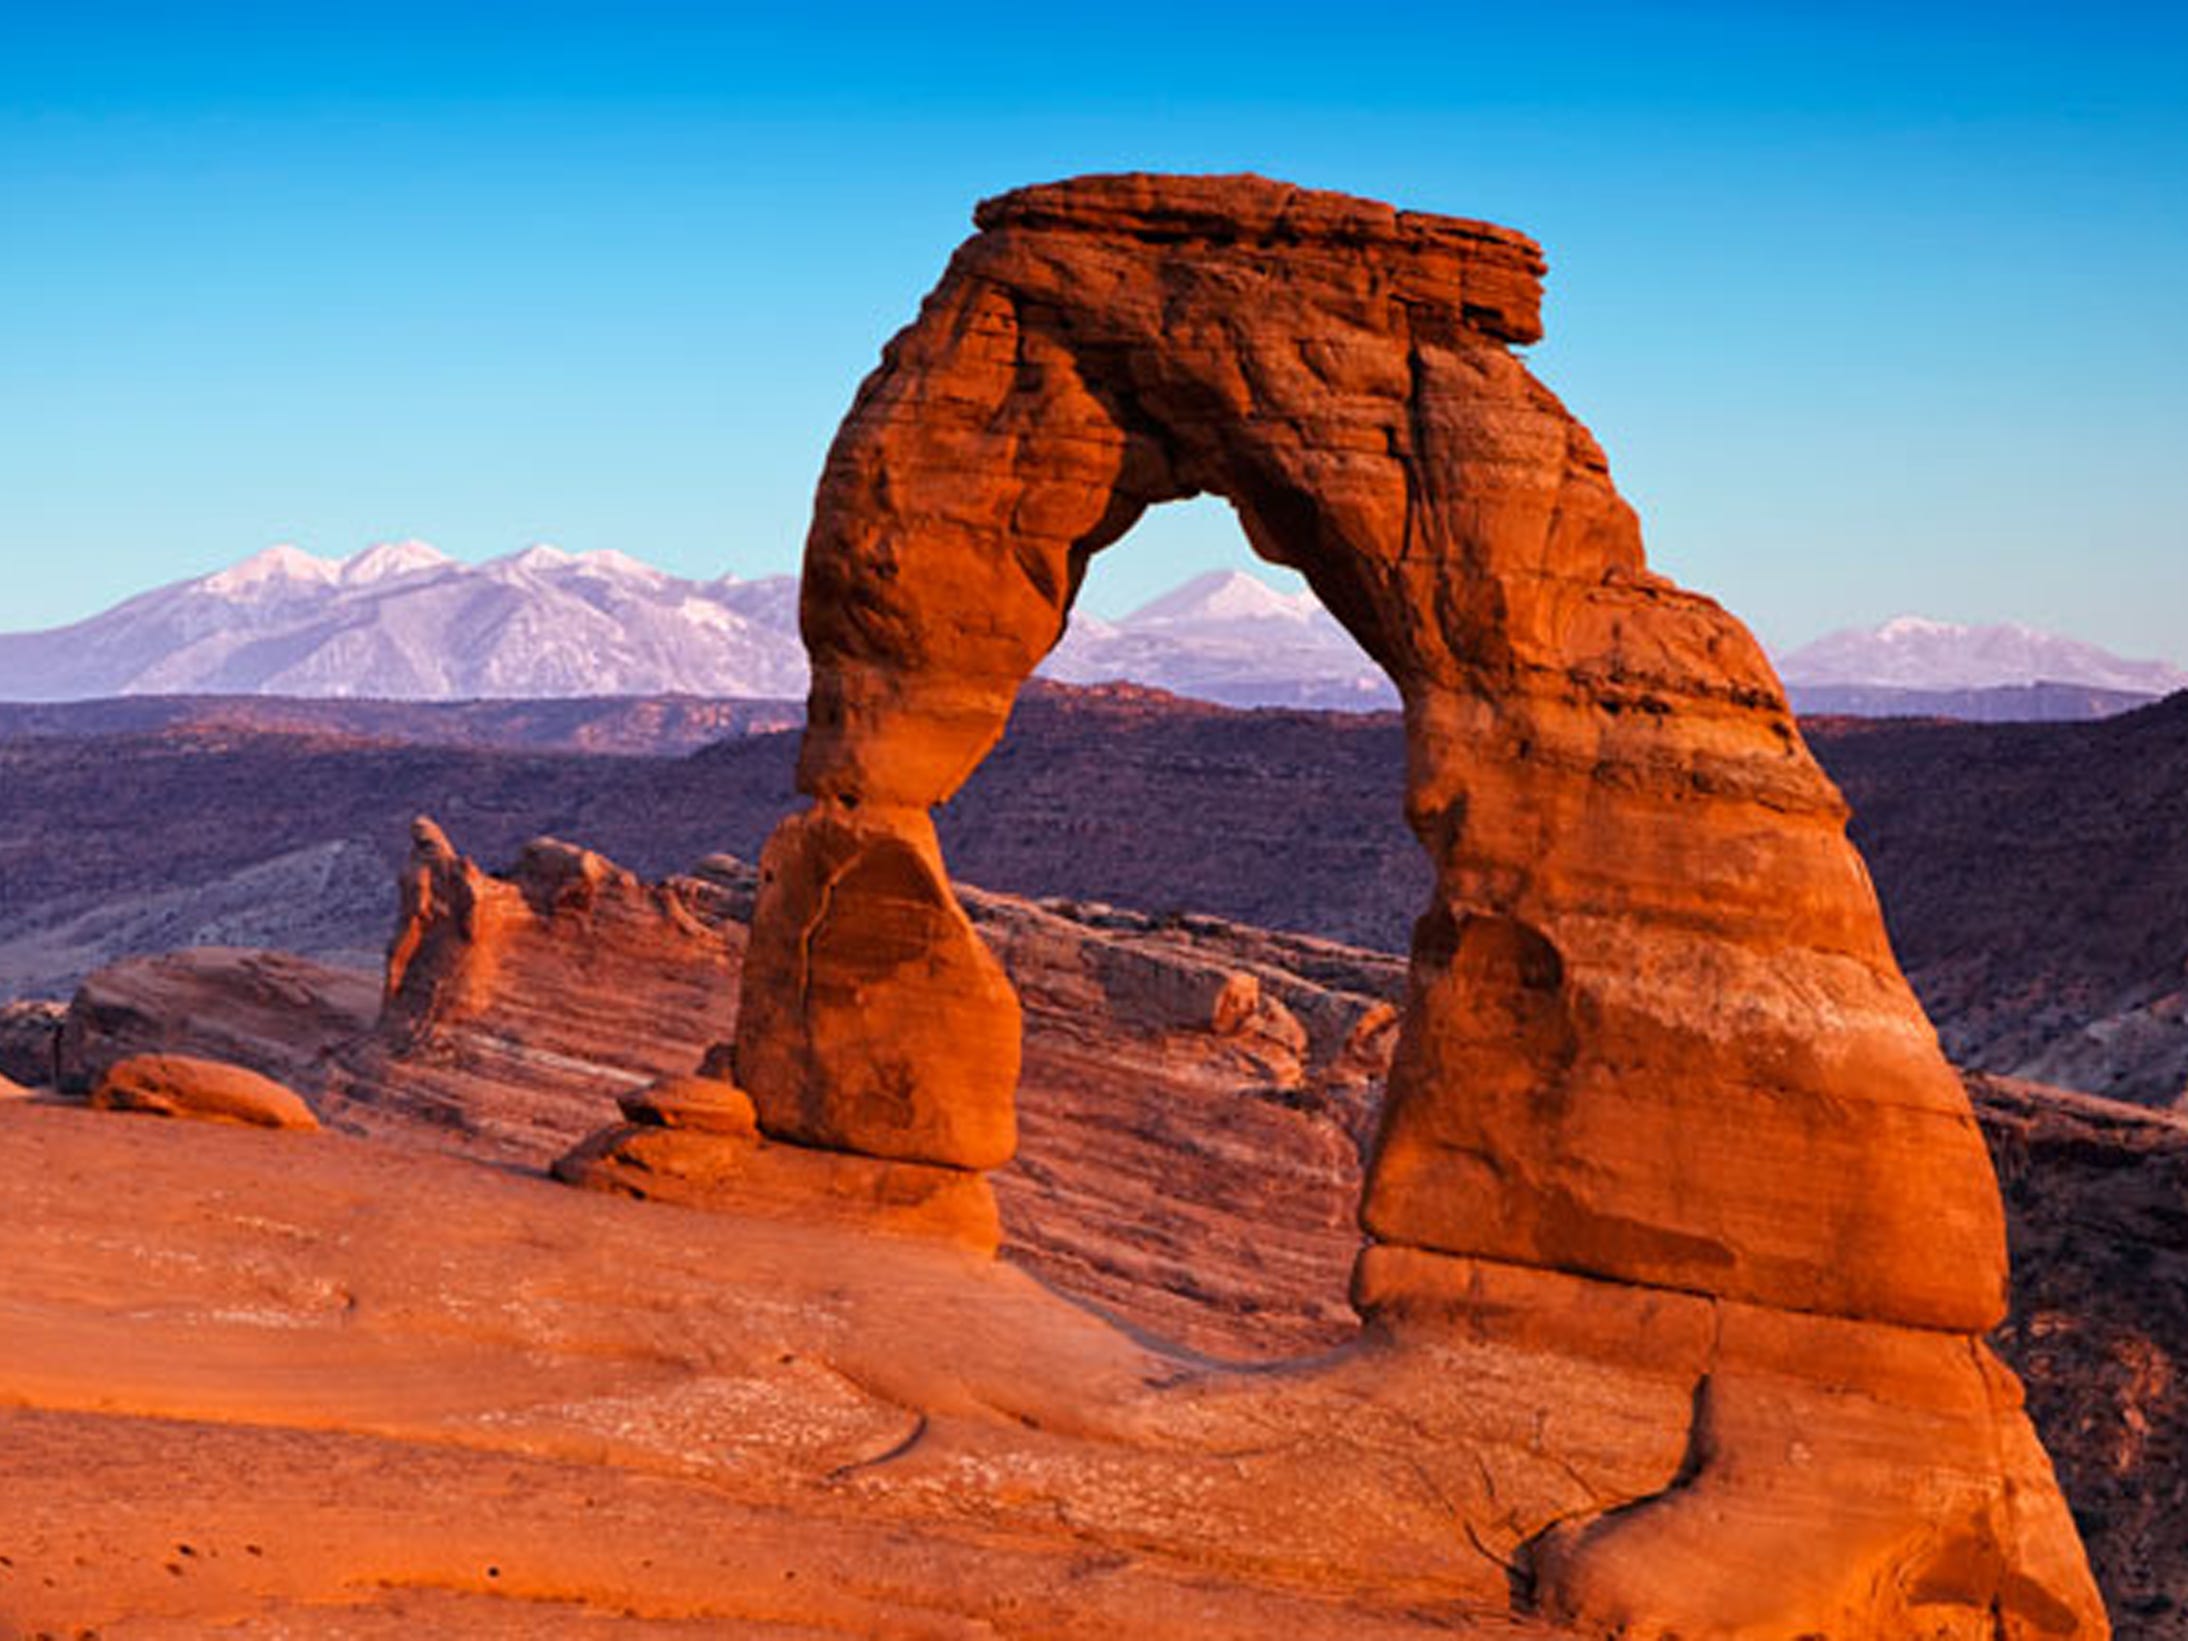 <p>The park contains over <a href="https://www.nps.gov/arch/index.htm" rel="noopener">2,000 stone arches</a> formed naturally, the largest one spanning 306 feet. As <a href="https://www.insider.com/arches-national-park-disappointing-photos-what-its-actually-like-2022-5">Insider's Monica Humphries found</a> when she visited in 2022, the park is often packed with tourists due to its popularity.</p>